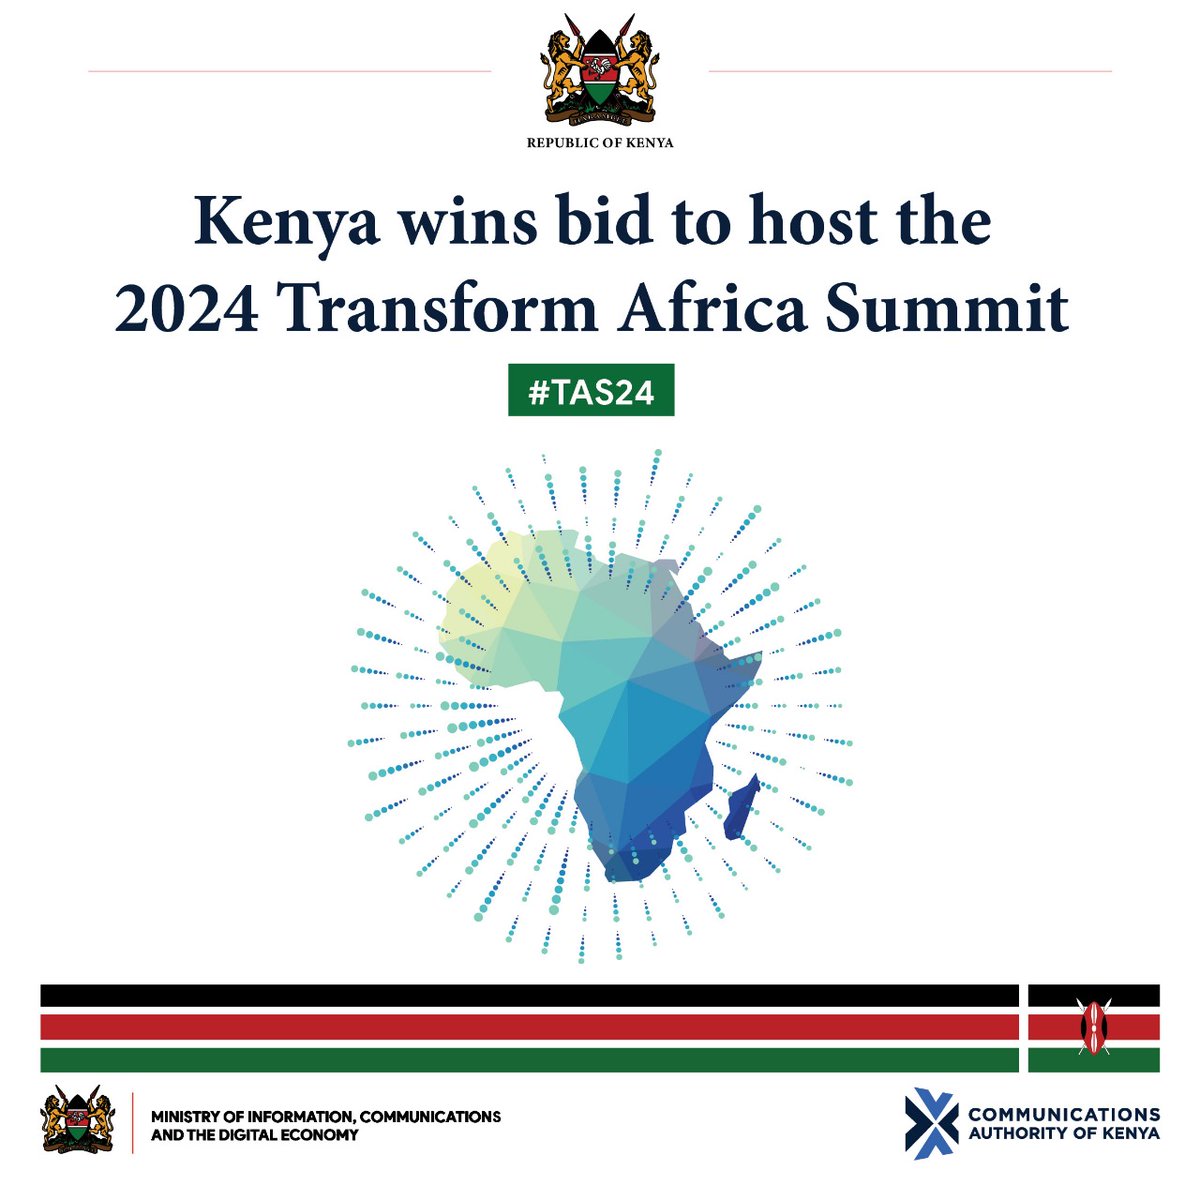 Transform Africa Summit, #TAS24, is Africa's leading annual forum that aims at fostering innovation, collaboration and sustainable development across the African continent. It brings together regional and international leaders from govts and business organizations #TAS2024LAUNCH